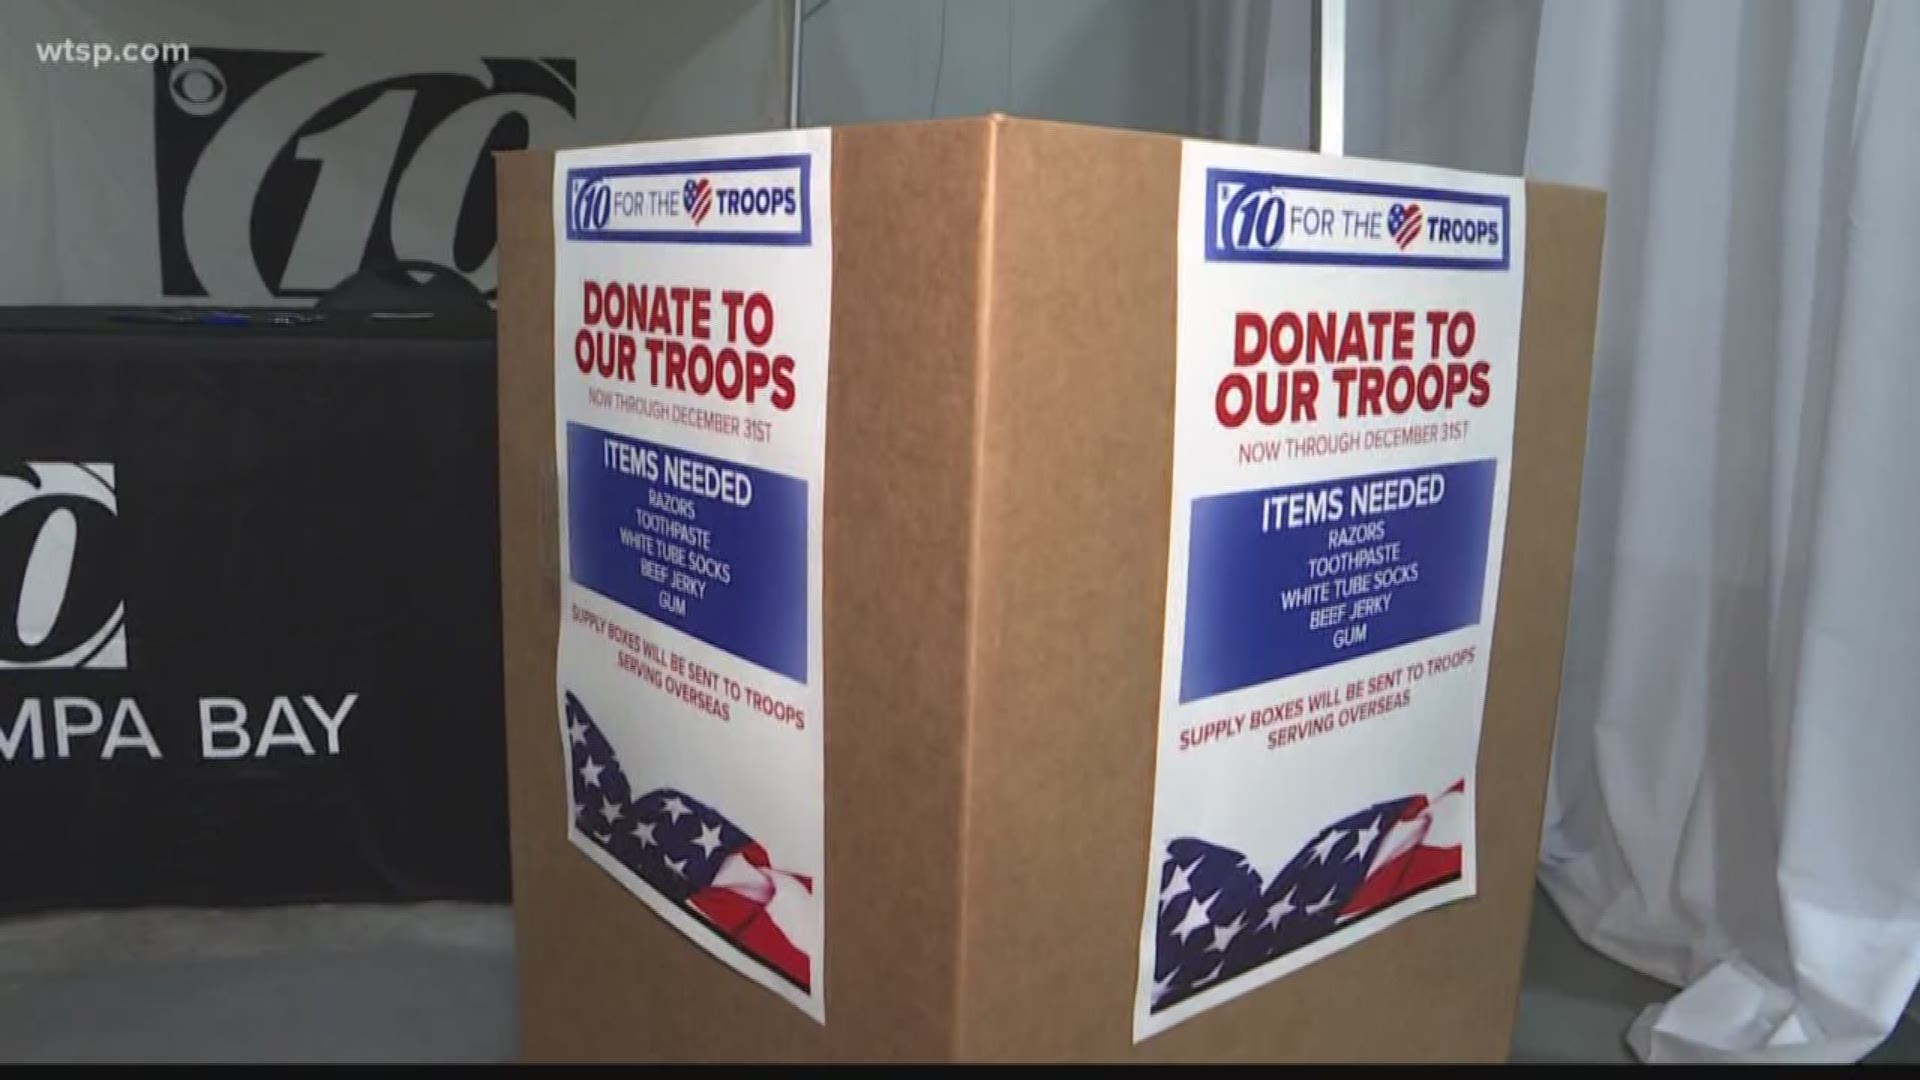 This holiday season, 10News WTSP is teaming up with the charity Support the Troops to collect supplies for troops stationed overseas